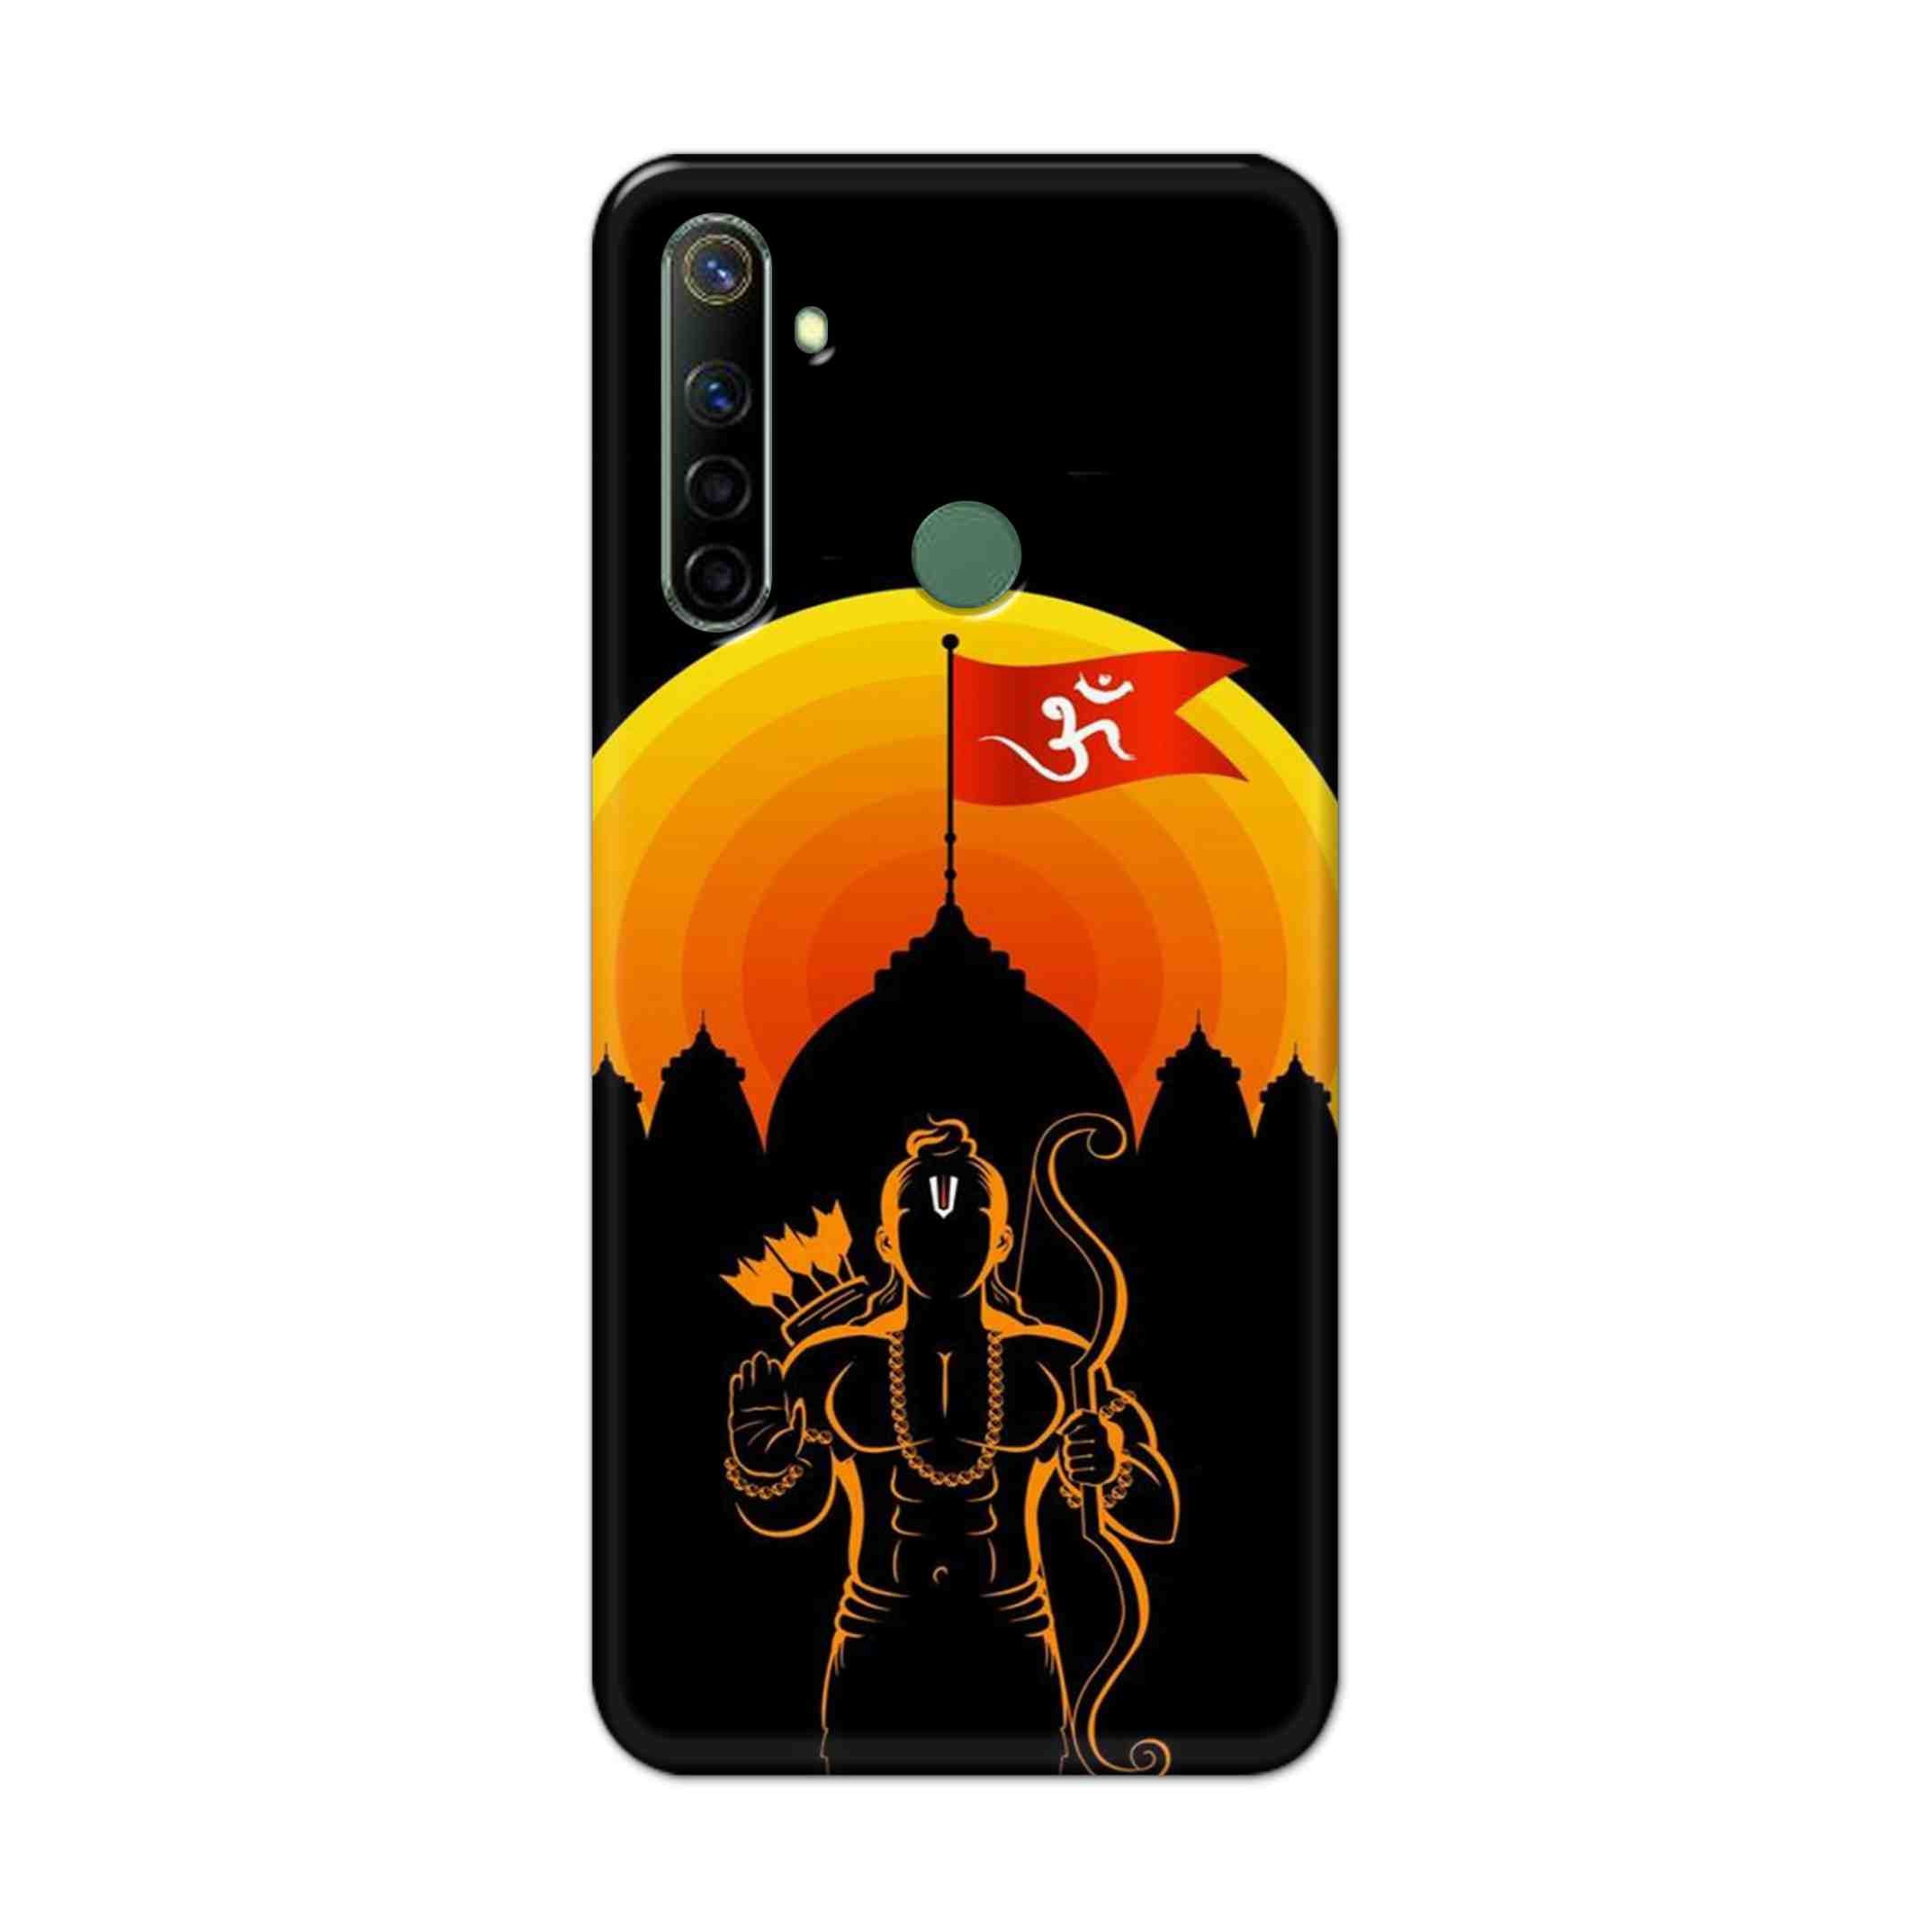 Buy Ram Ji Hard Back Mobile Phone Case Cover For Realme Narzo 10a Online